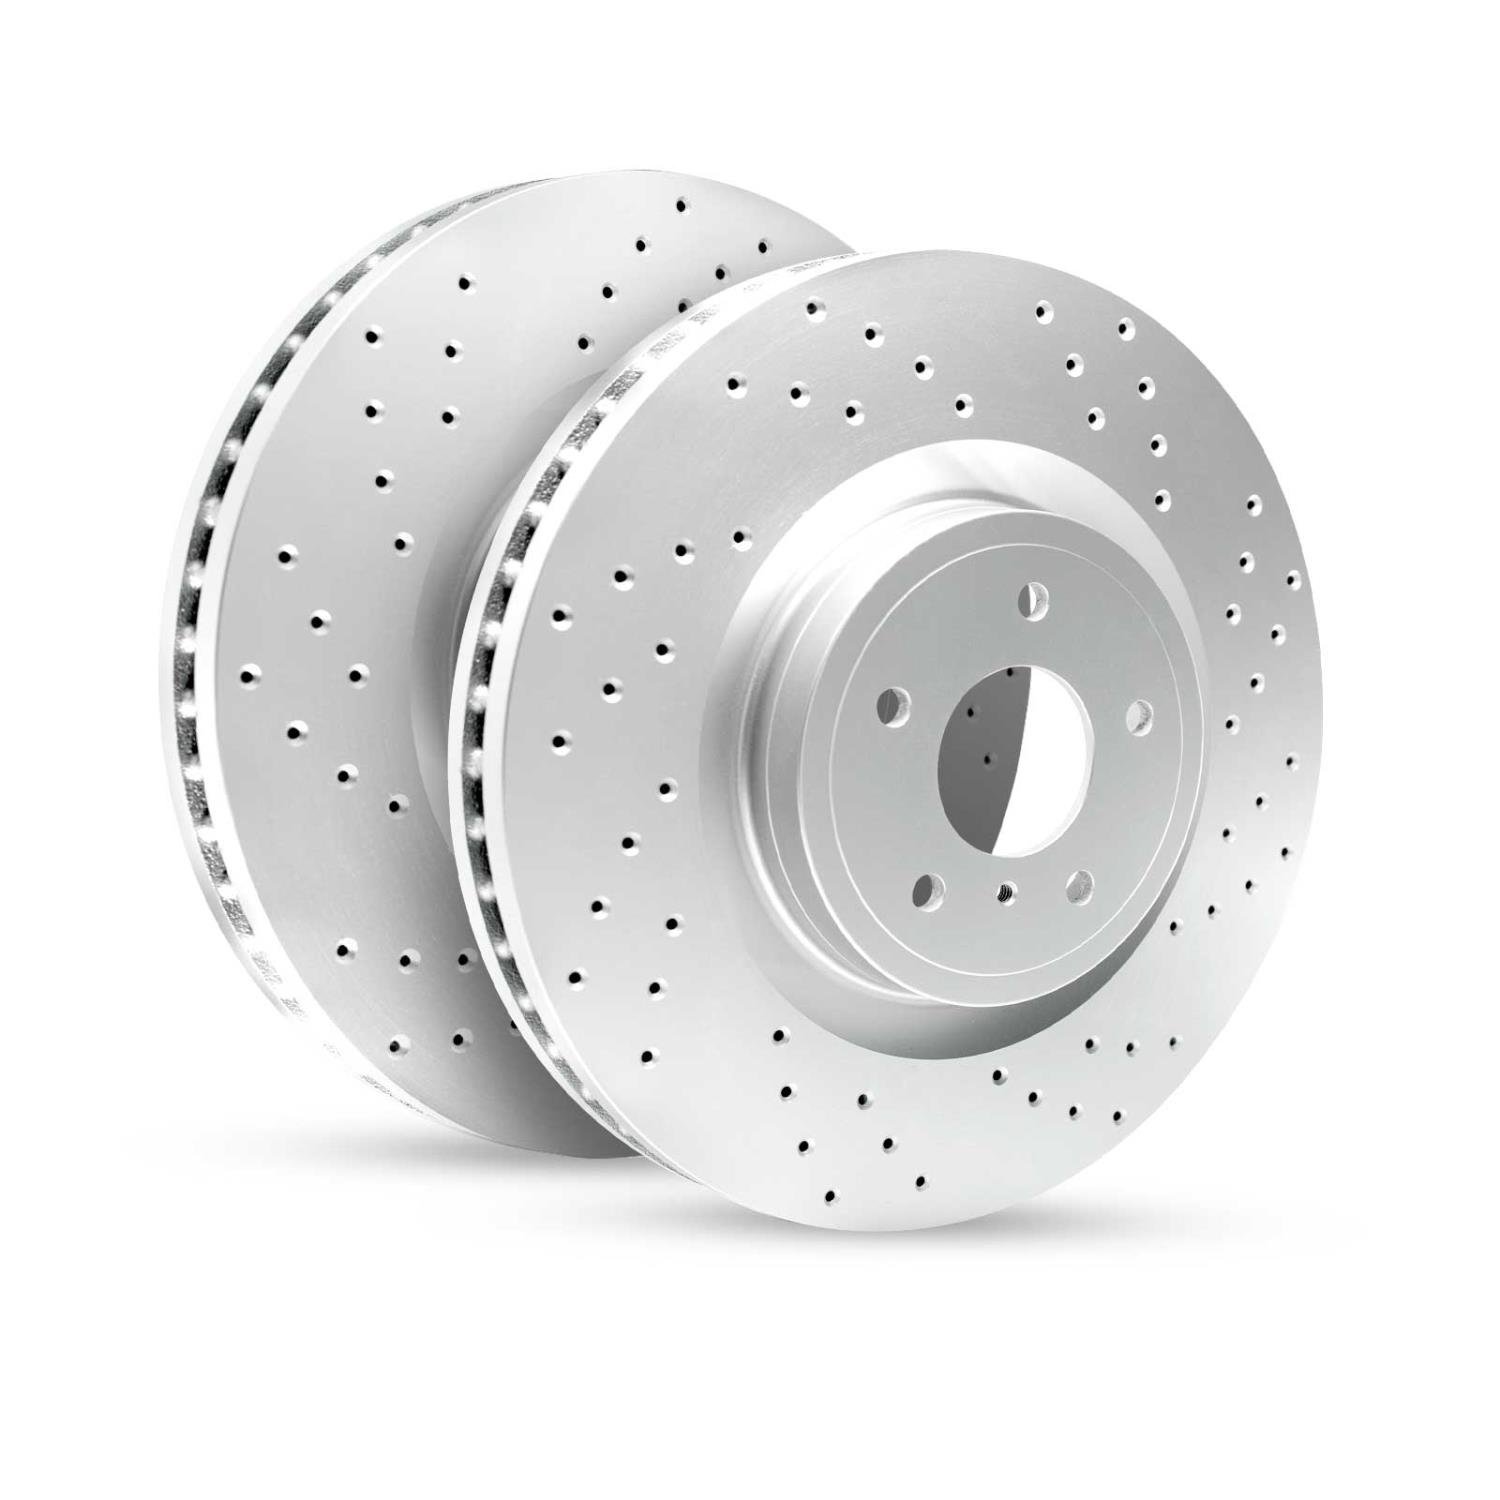 GEO-Carbon Drilled/Slotted Rotors, 1997-2004 Ford/Mazda,